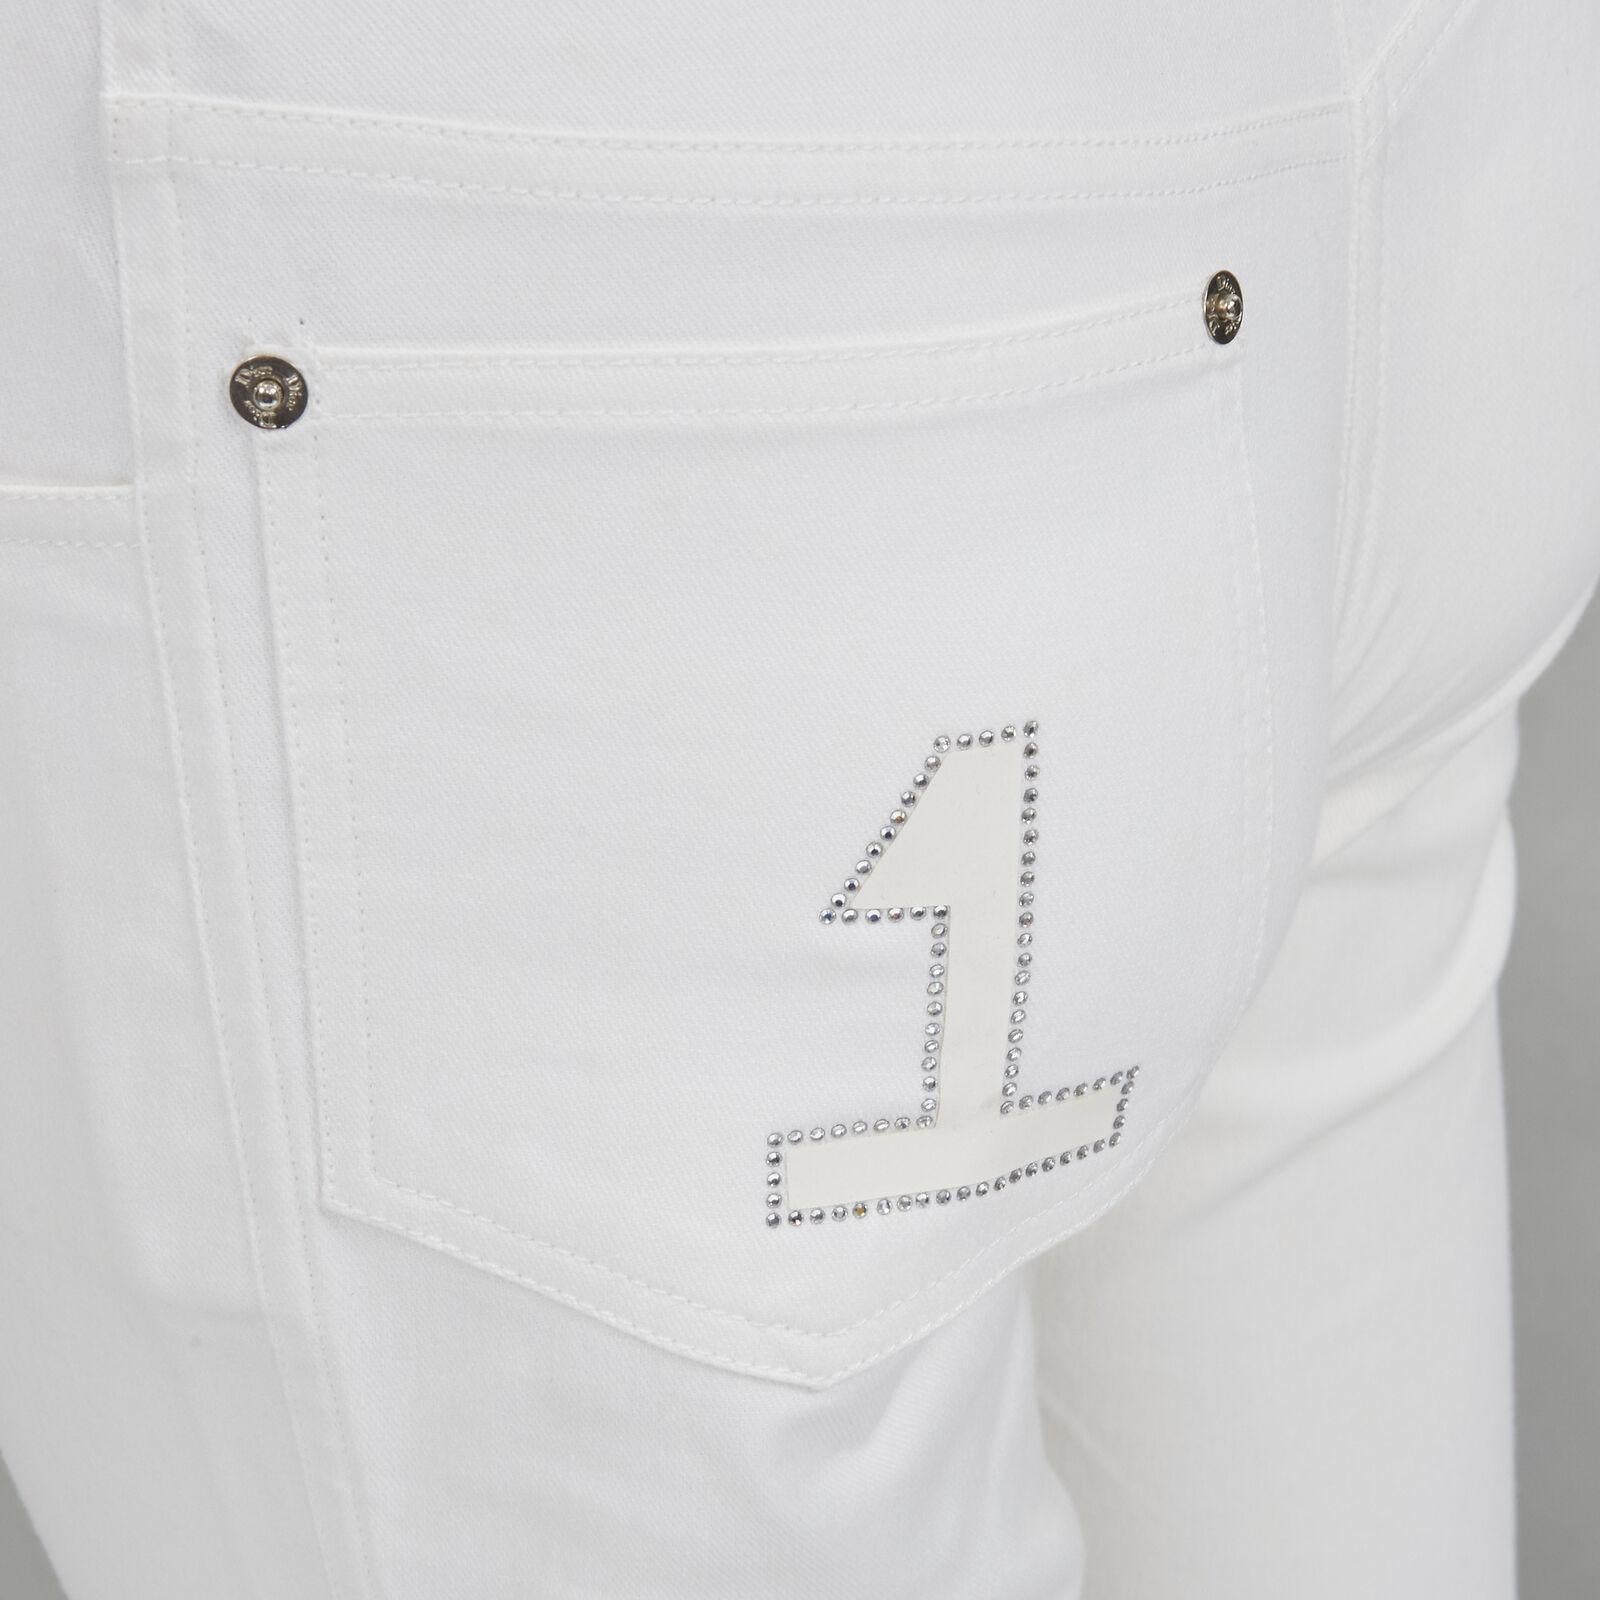 CHRISTIAN DIOR John Galliano Y2K crystal 3D petal cropped flare jeans
Reference: ANWU/A00538
Brand: Christian Dior
Designer: John Galliano
Material: Feels like cotton
Color: White
Pattern: Solid
Closure: Zip Fly

CONDITION:
Condition: Excellent,